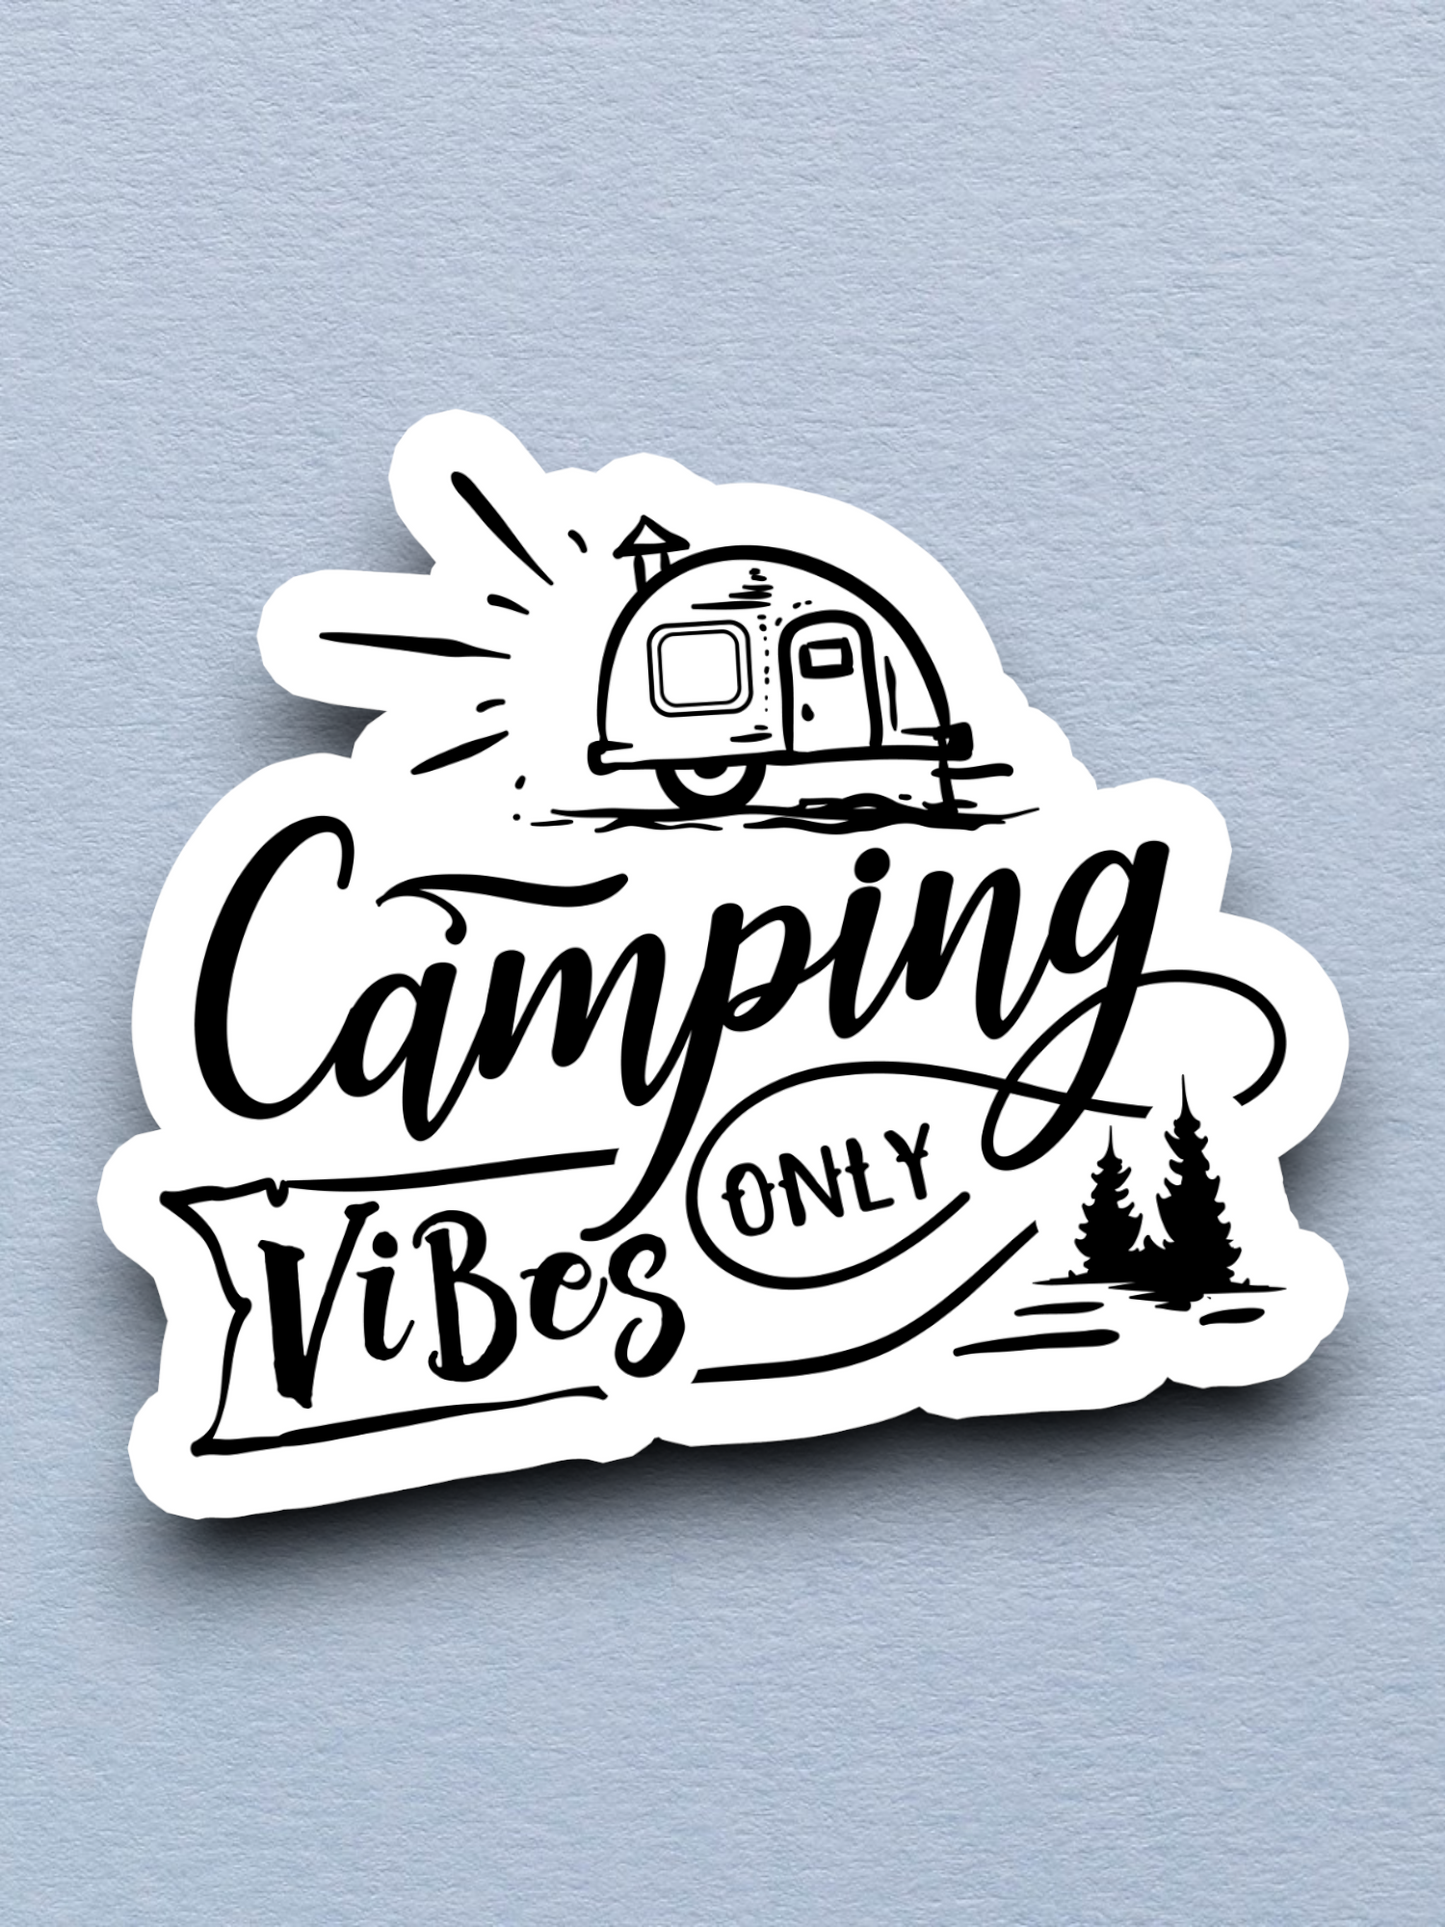 Camping Vibes Only - Travel Sticker